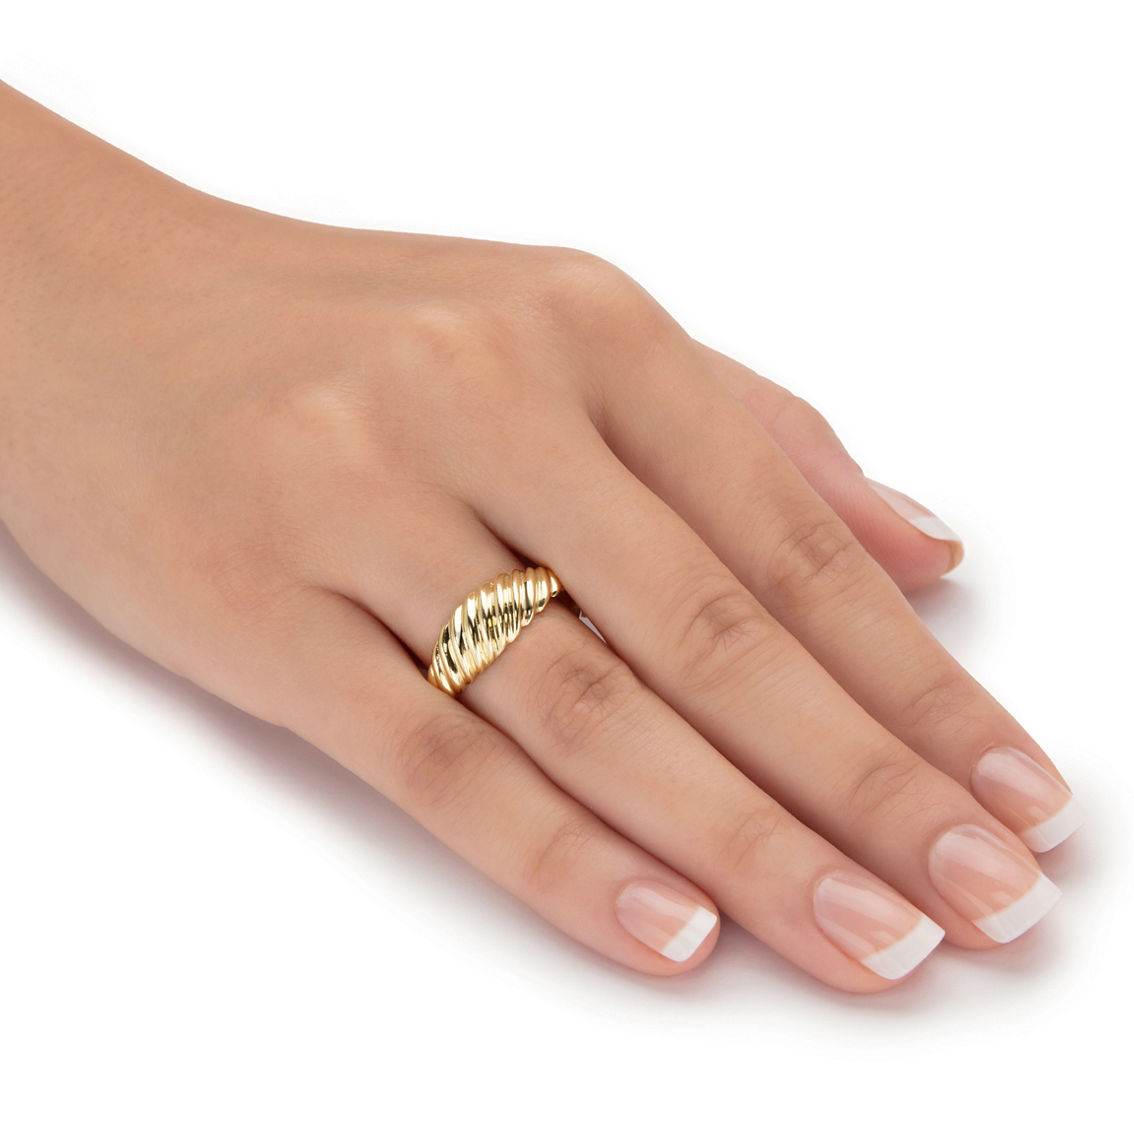 PalmBeach Polished Solid 10k Yellow Gold Shrimp-Style Ring - Image 3 of 5